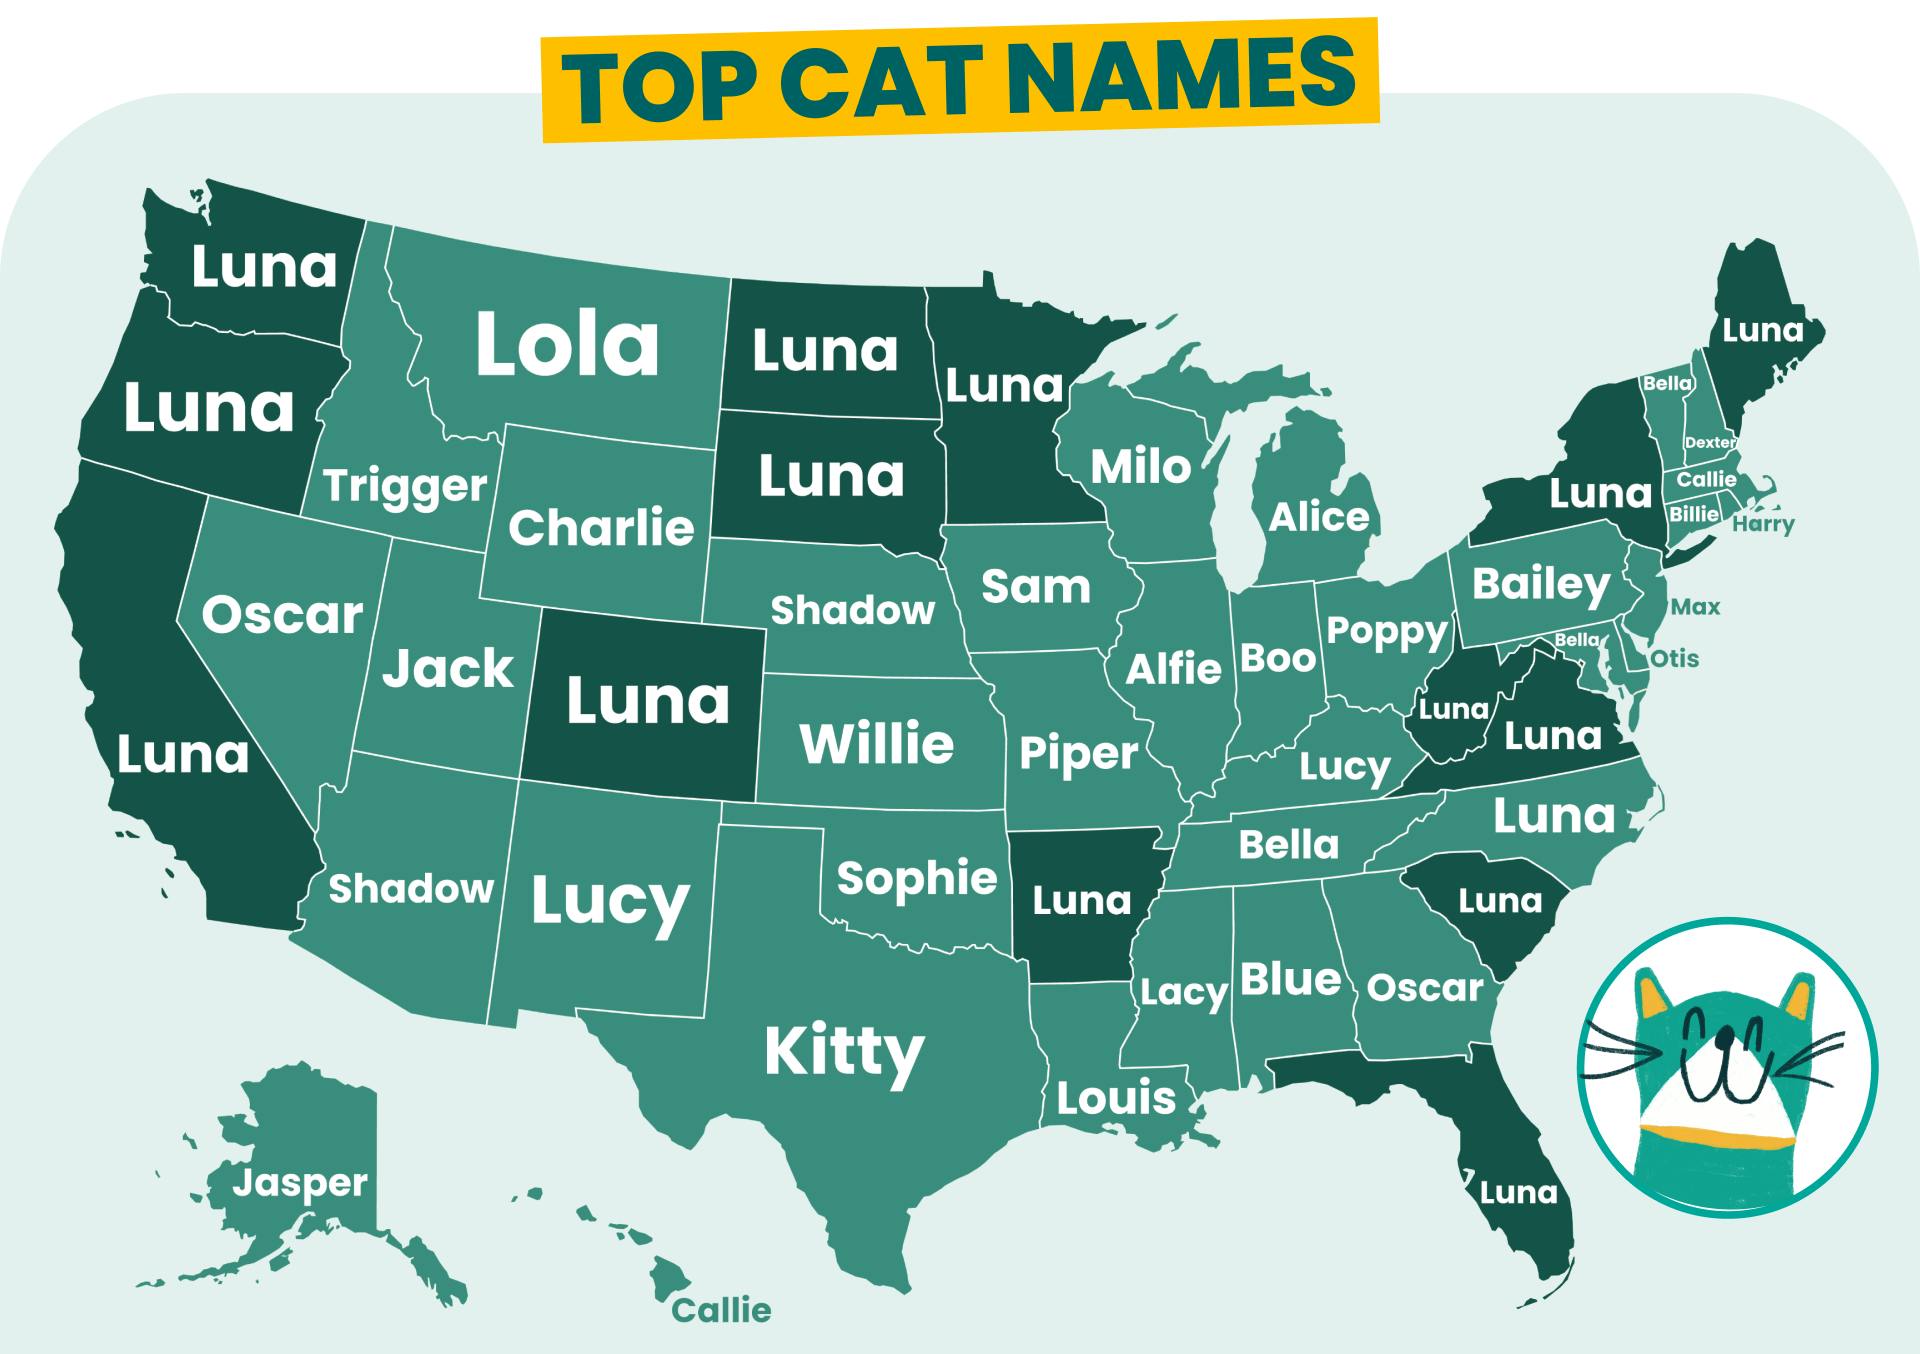 Top cat names by US state